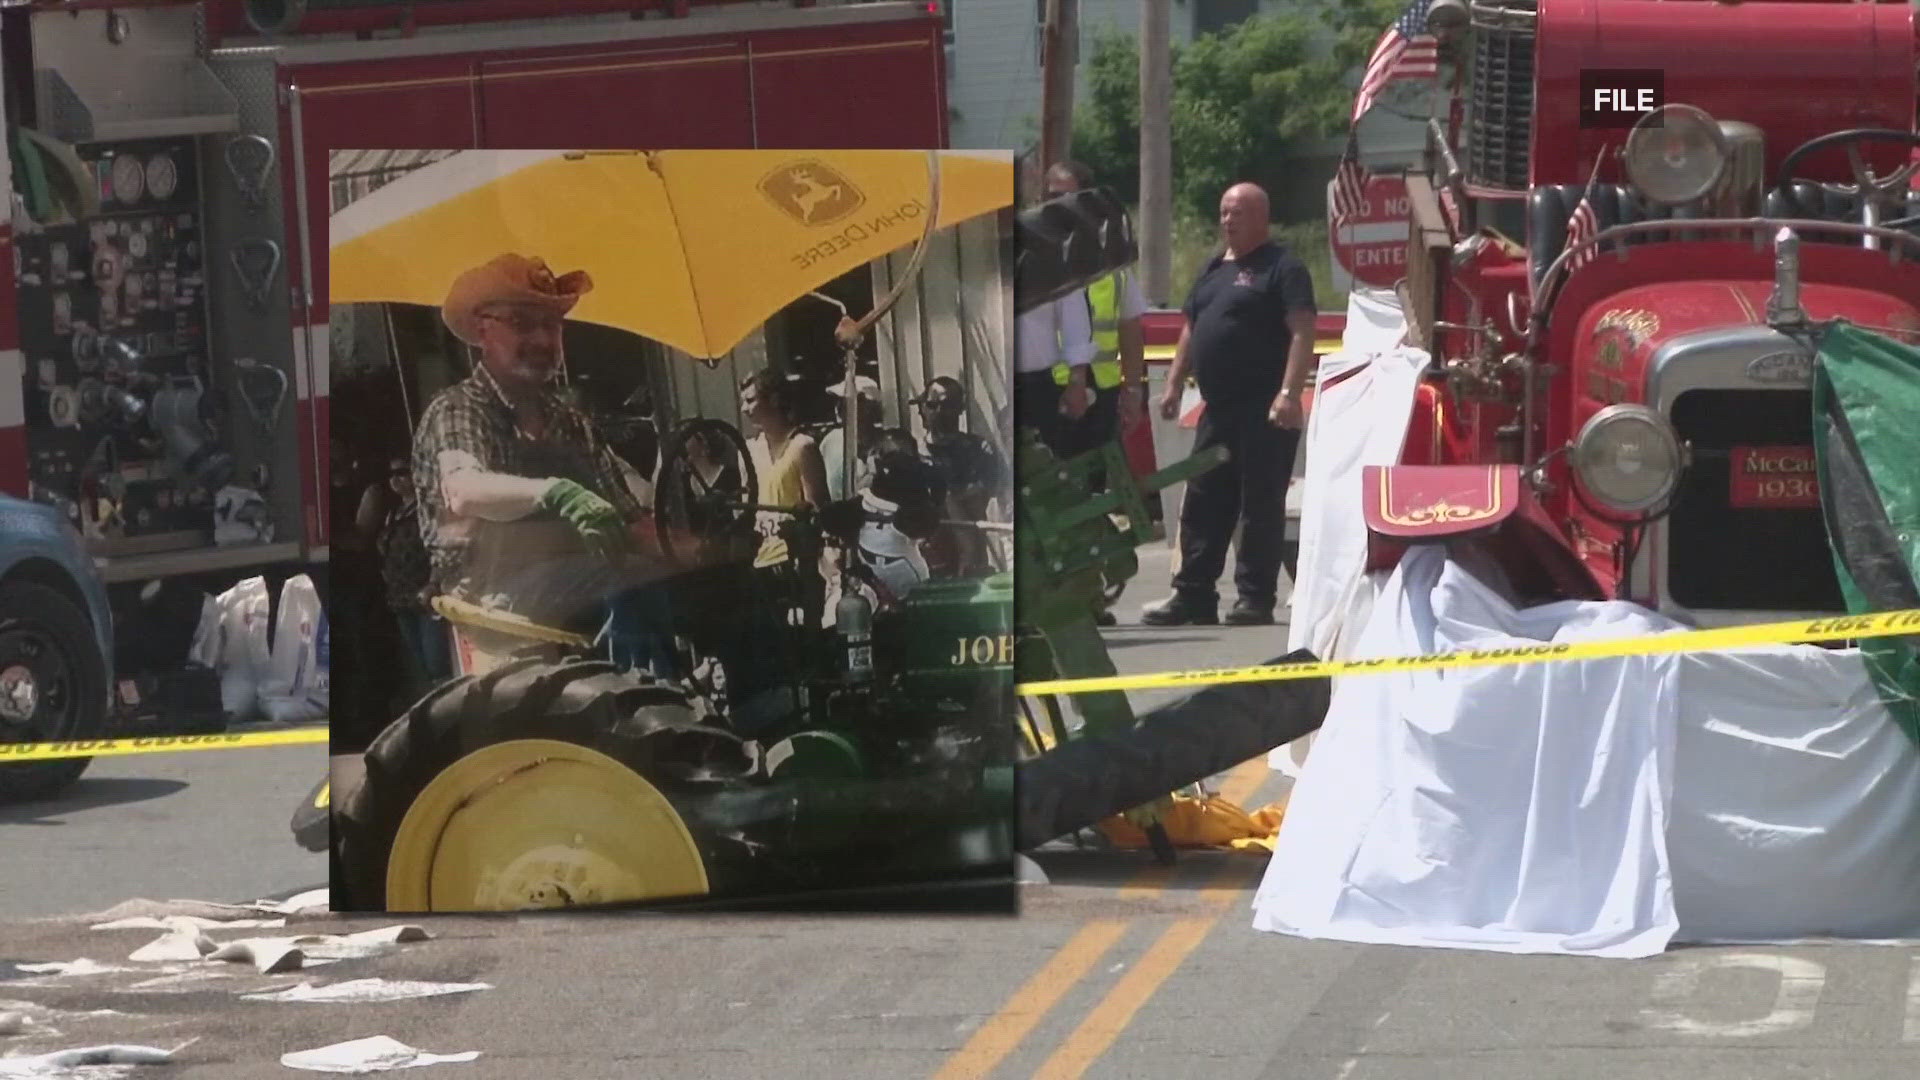 In 2014, a man from Holden was killed when an antique firetruck struck his 1941 tractor from behind.